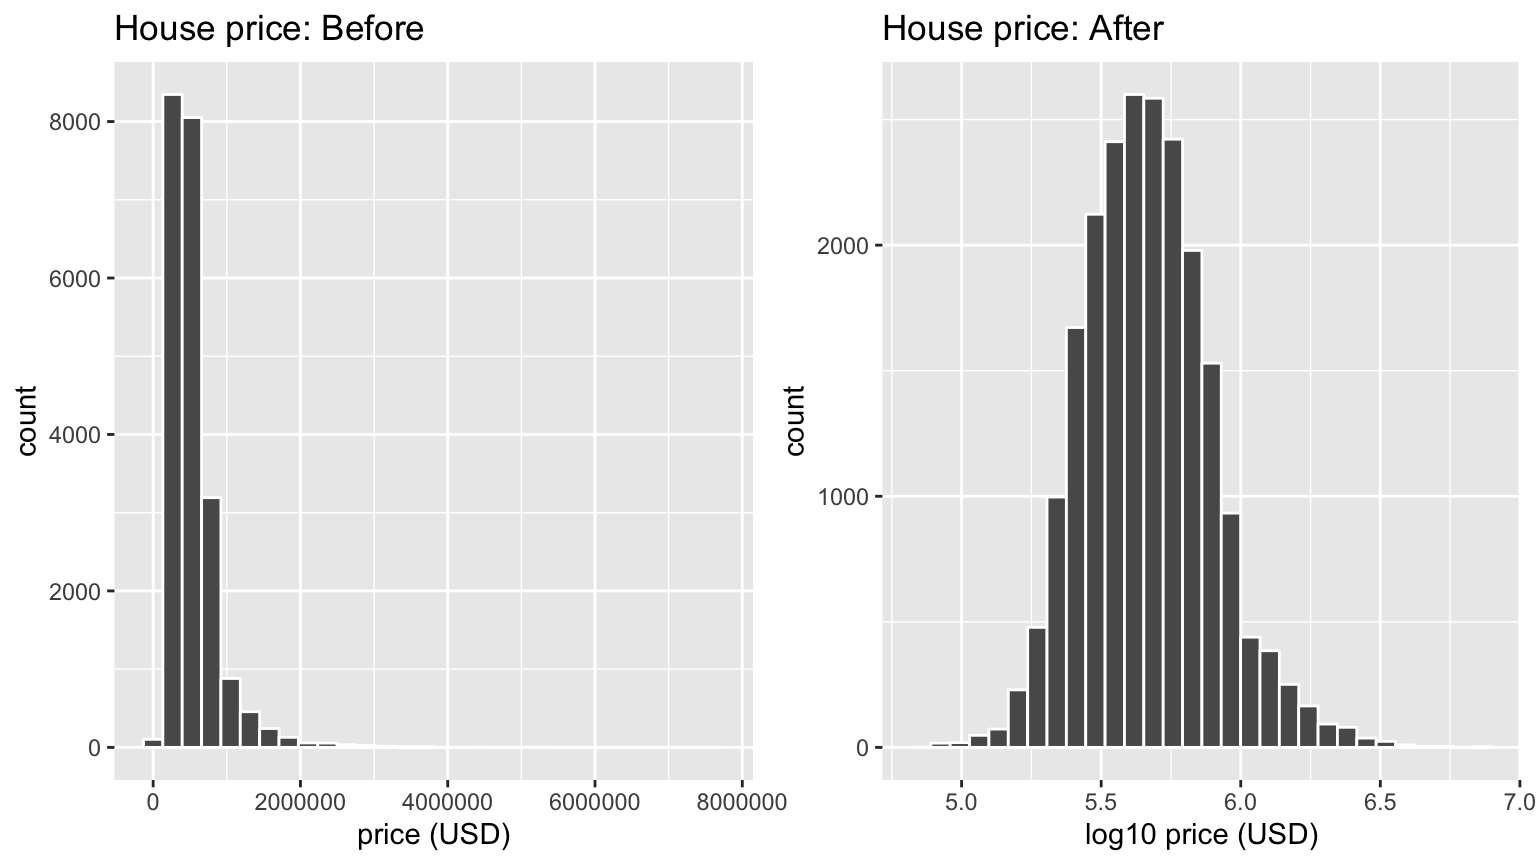 House price before and after log10-transformation